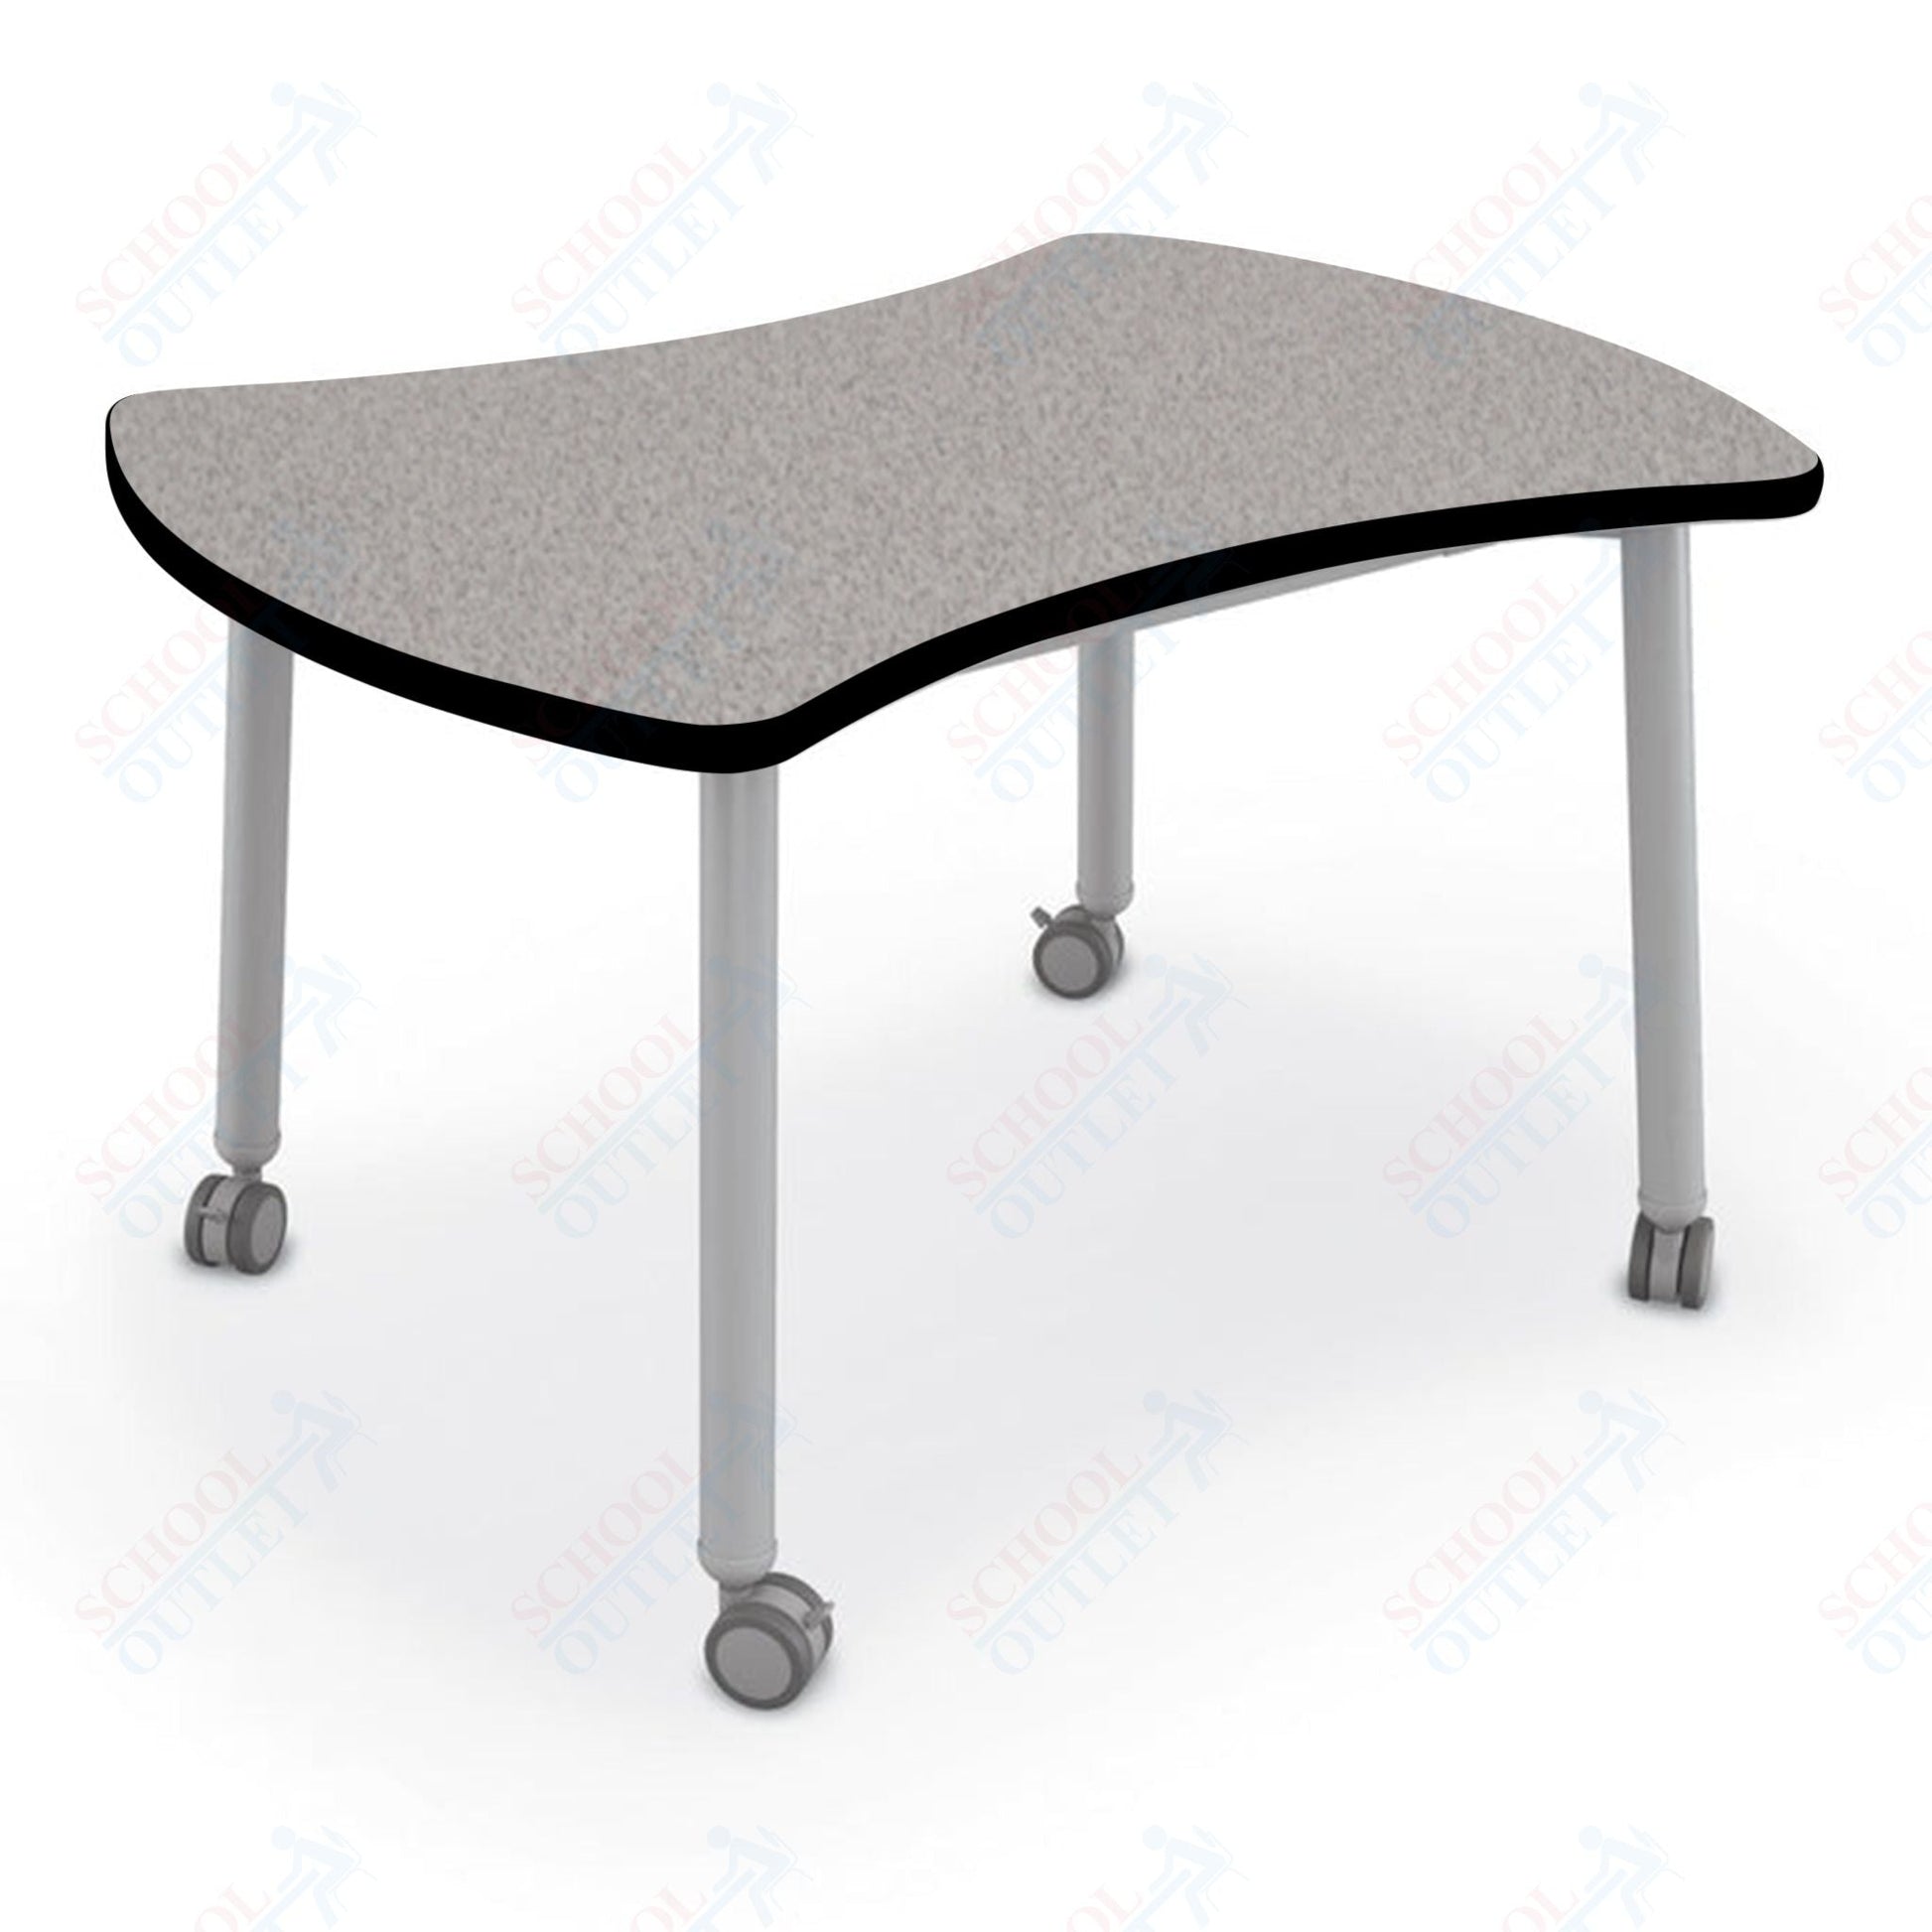 Mooreco Akt Table – Quad, Laminate Top, Fixed Height Available in 29"H, 36"H, or 42"H - SchoolOutlet